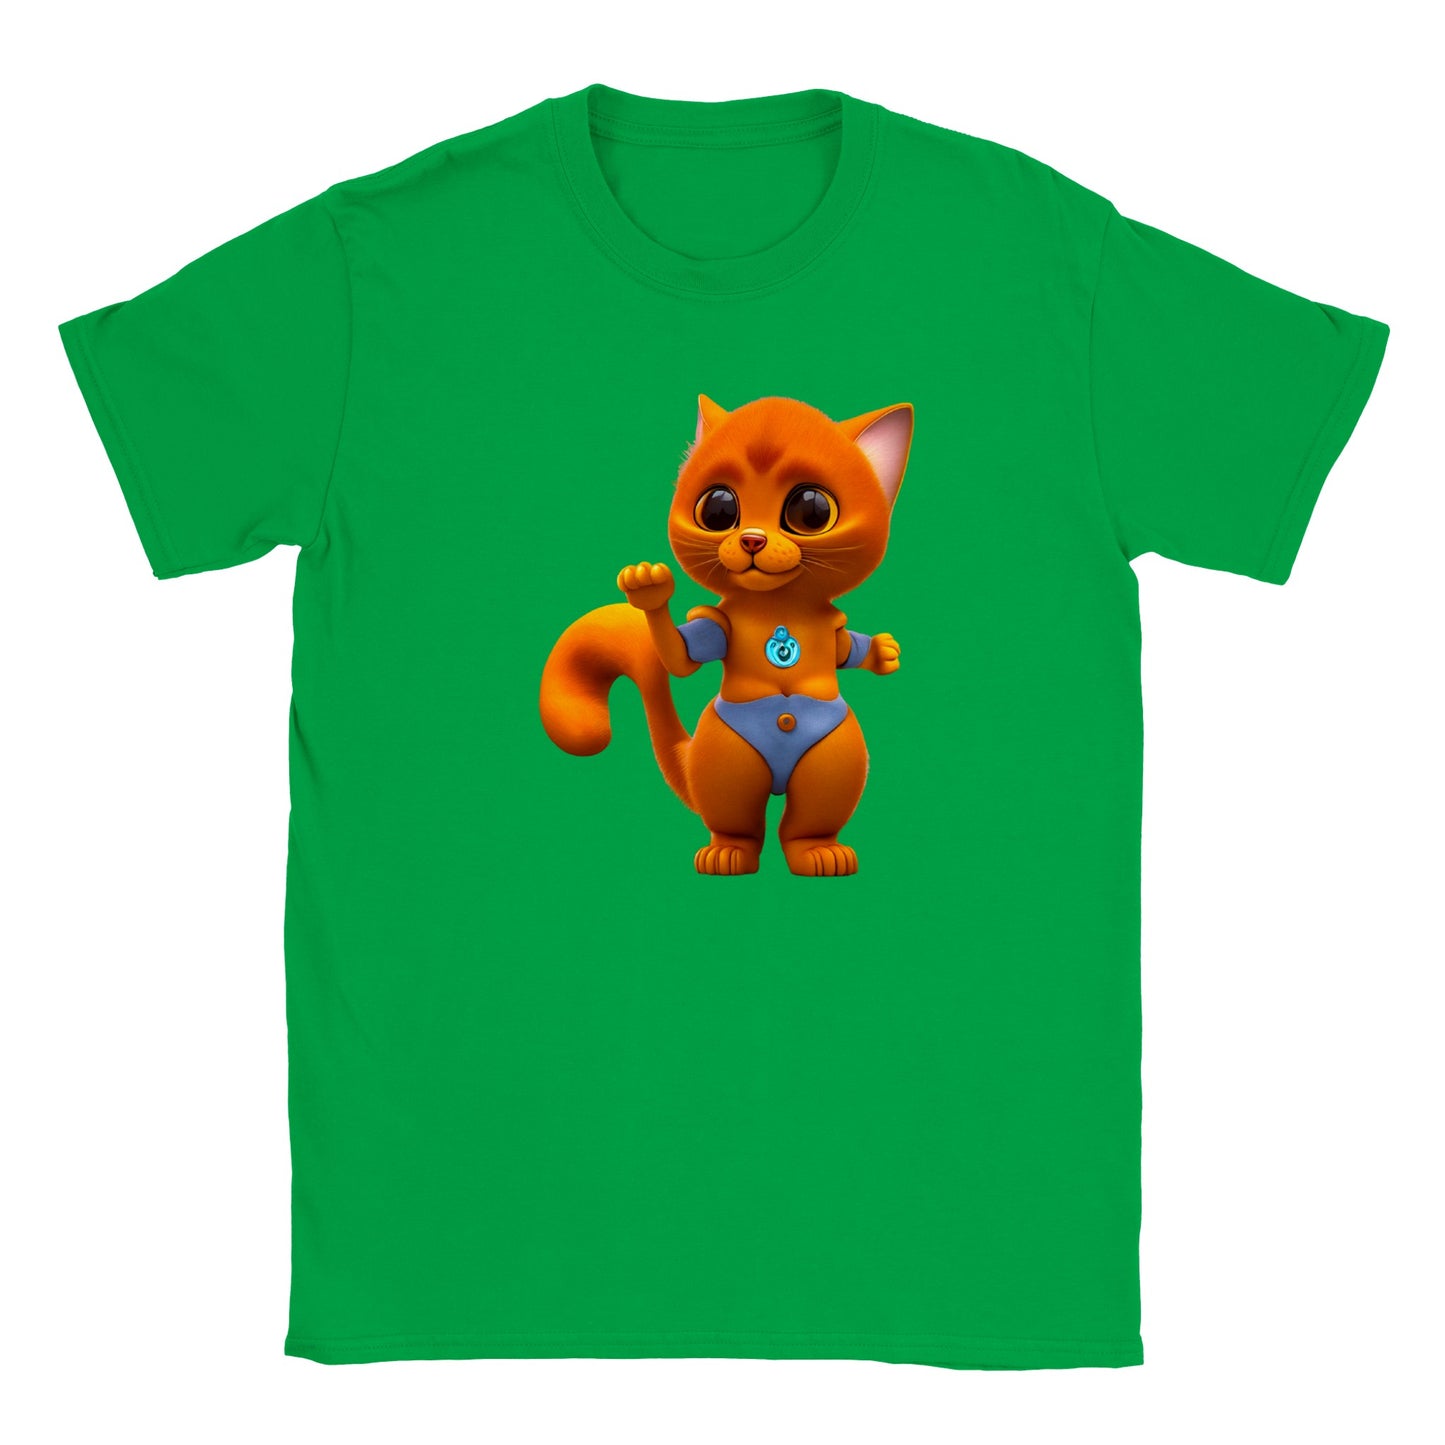 Adorable, Cool, Cute Cats and Kittens Toy - Classic Kids Crewneck T-Shirt 50